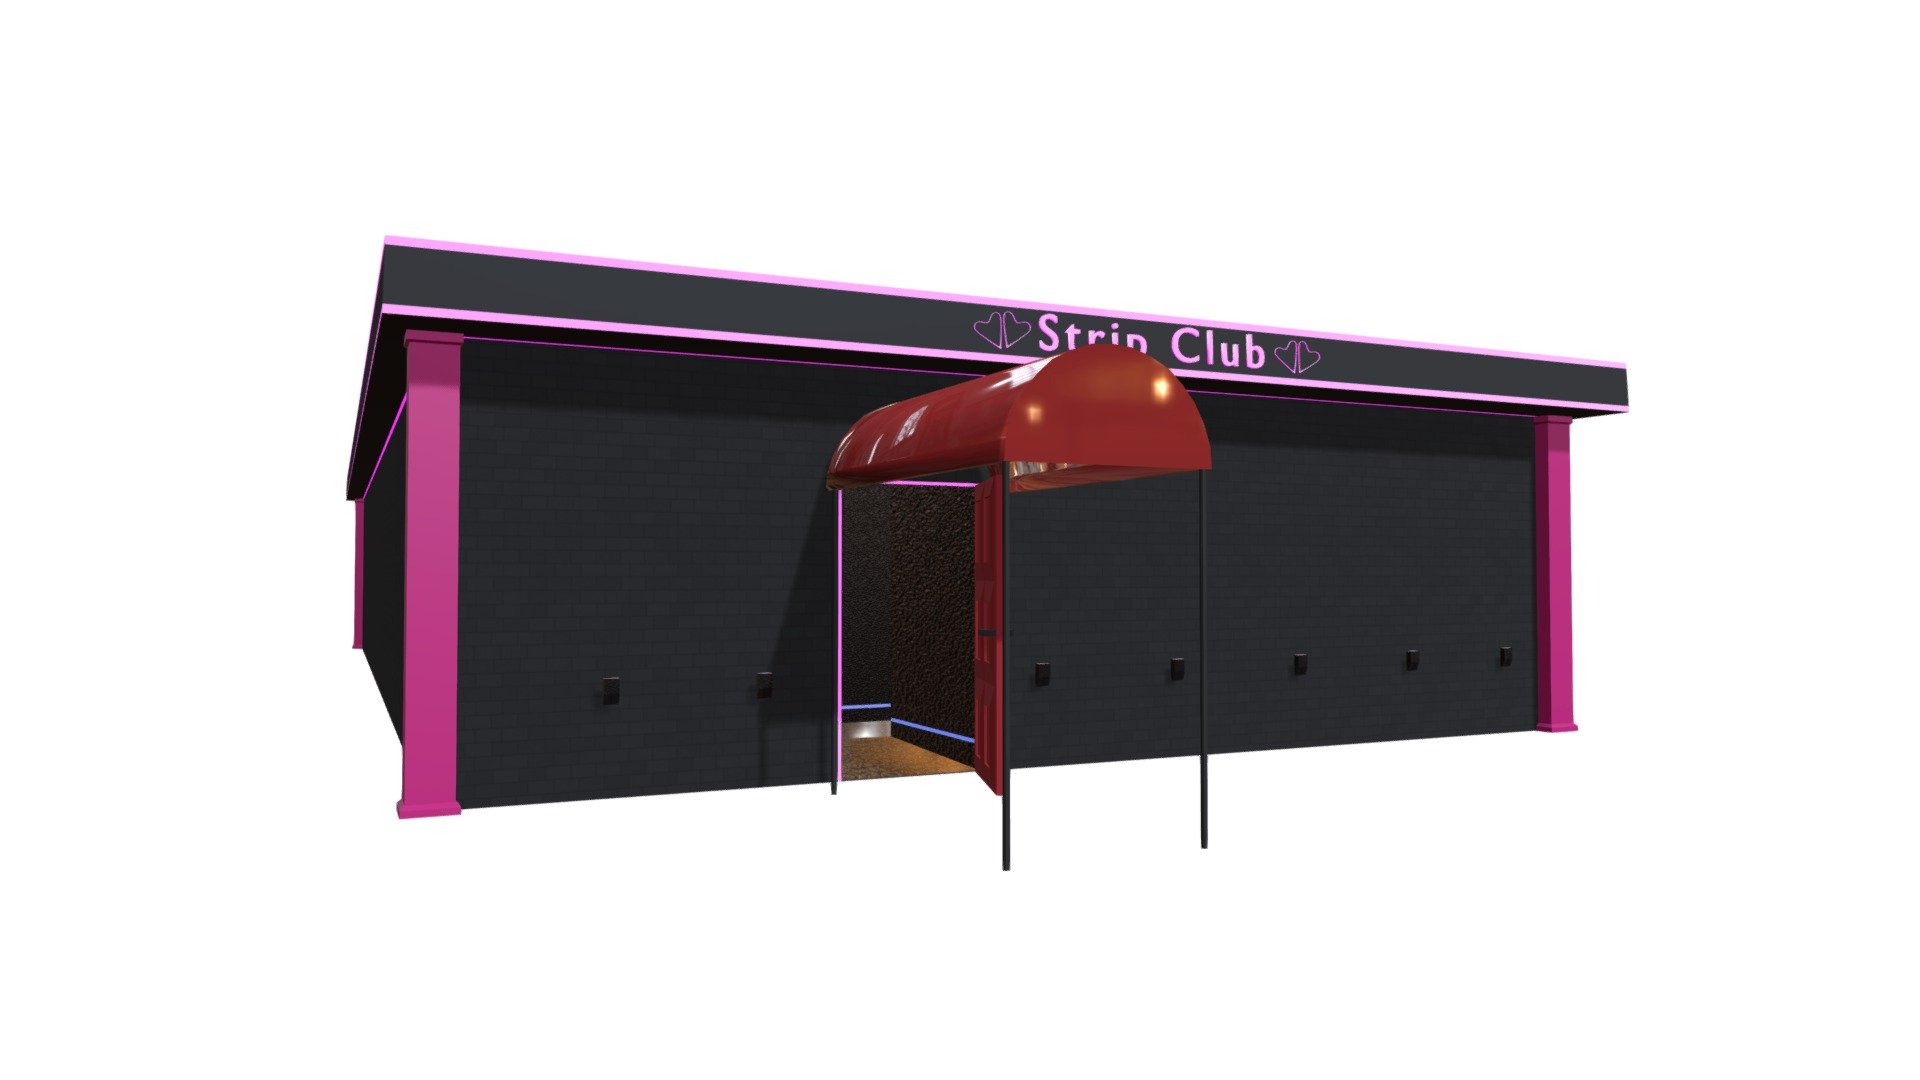 3D model of Strip club Exterior and Interior

Made in Blender.

Textures and materials included

Every Object is UV-unwrapped

There is no nudity in this model



A strip club is a venue where strippers provide adult entertainment, predominantly in the form of striptease or other erotic dances. Strip clubs typically adopt a nightclub or bar style, and can also adopt a theatre or cabaret-style 3d model